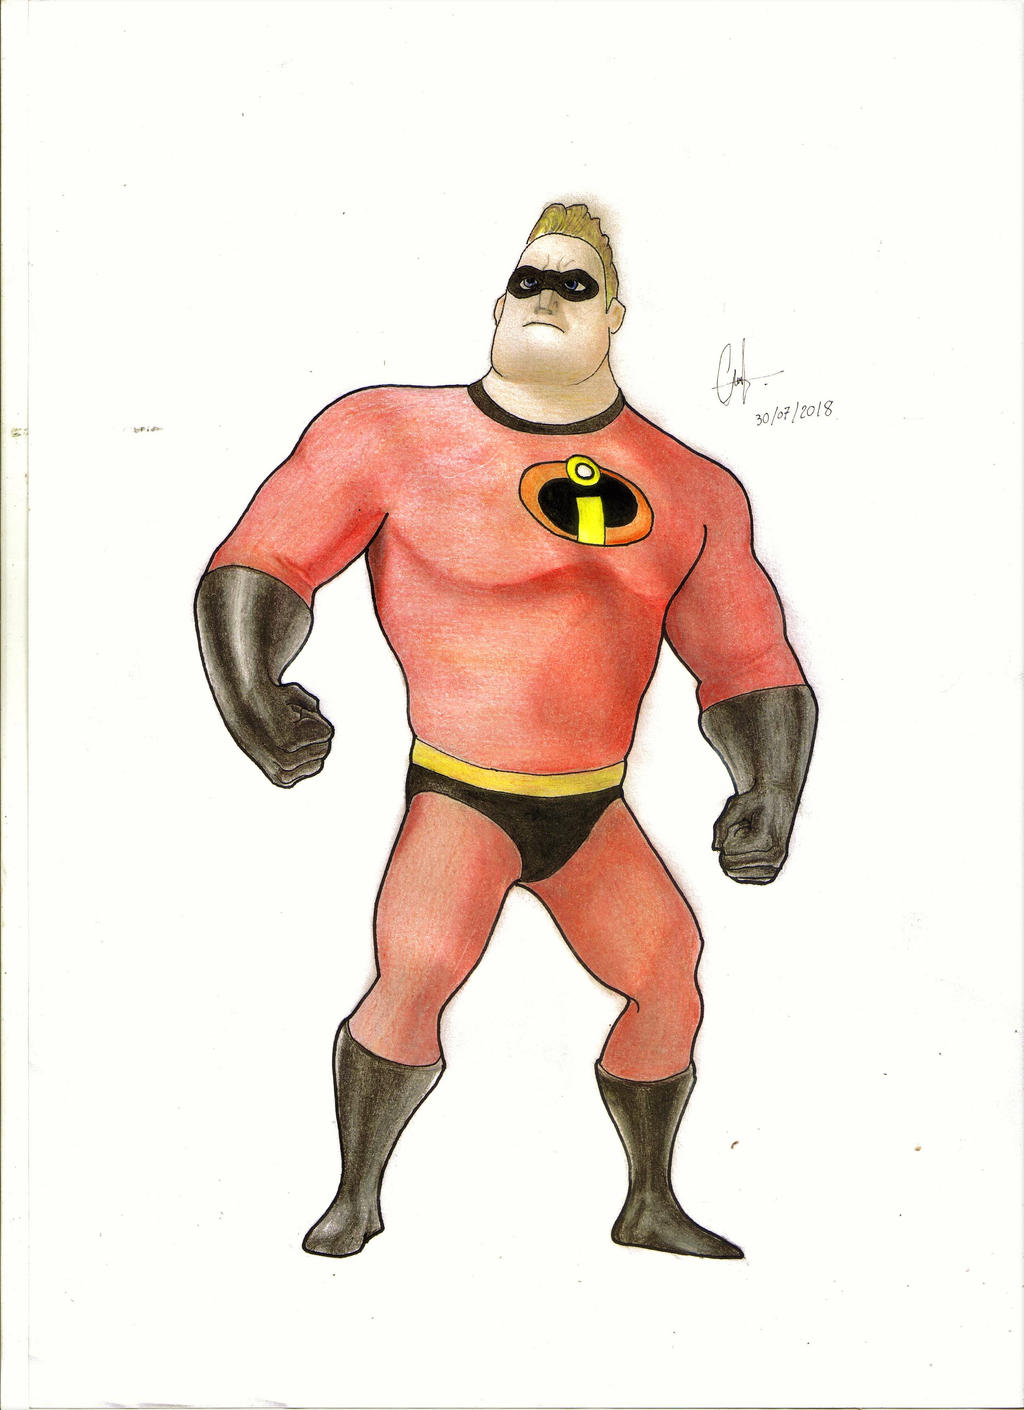 The Incredibles: Mr. Incredible by drawick on DeviantArt